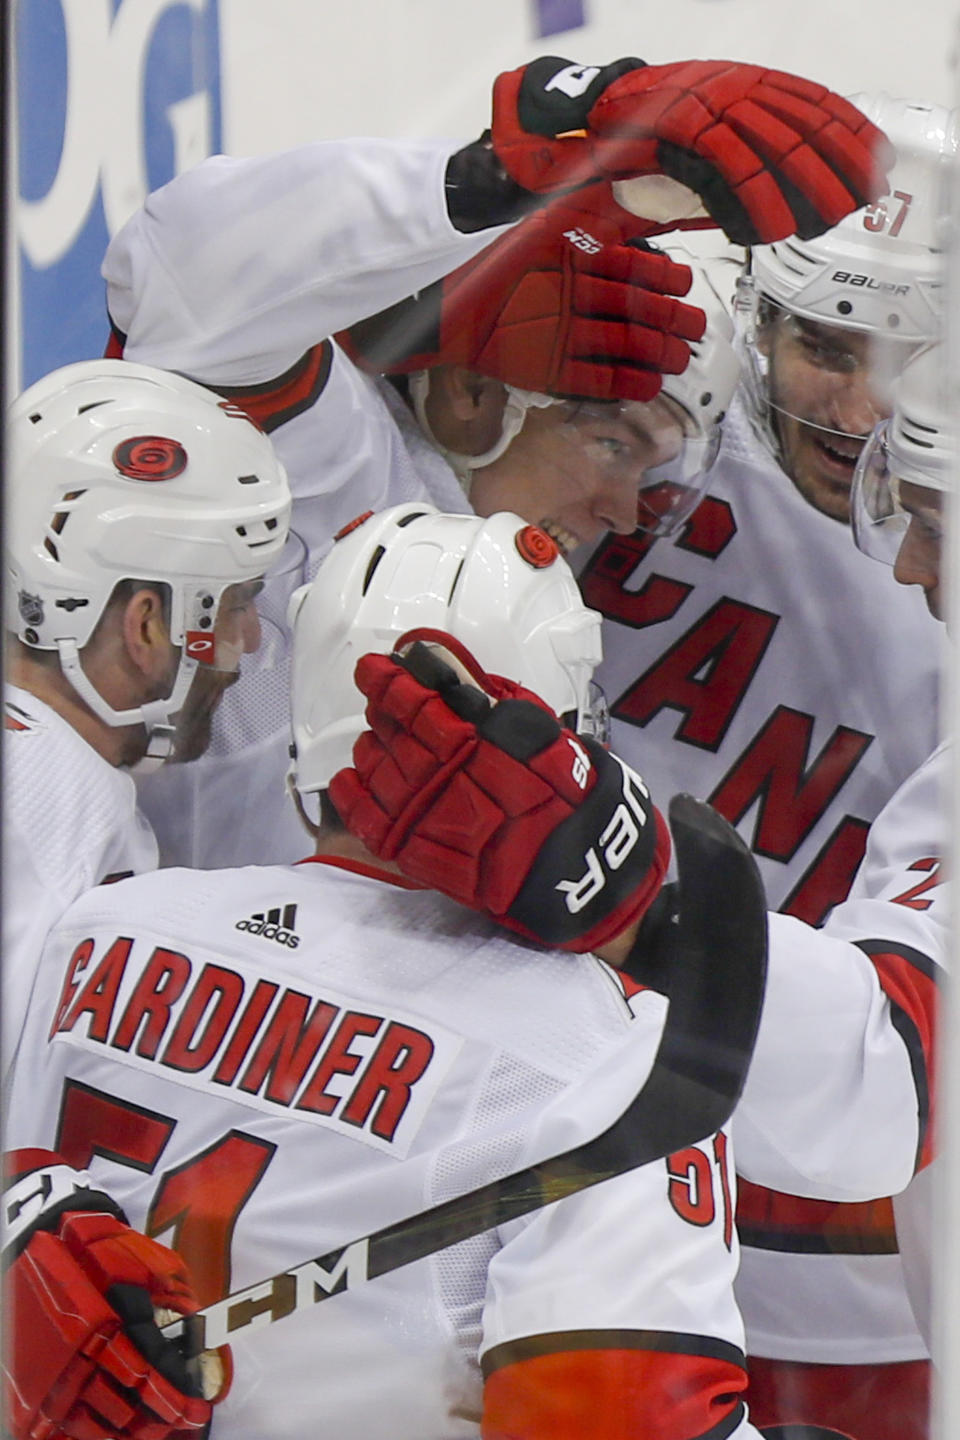 Carolina Hurricanes' Morgan Geekie, center, celebrates with teammates after scoring his first goal in the NHL during the first period of an NHL hockey game against the Pittsburgh Penguins, Sunday, March 8, 2020, in Pittsburgh. (AP Photo/Keith Srakocic)